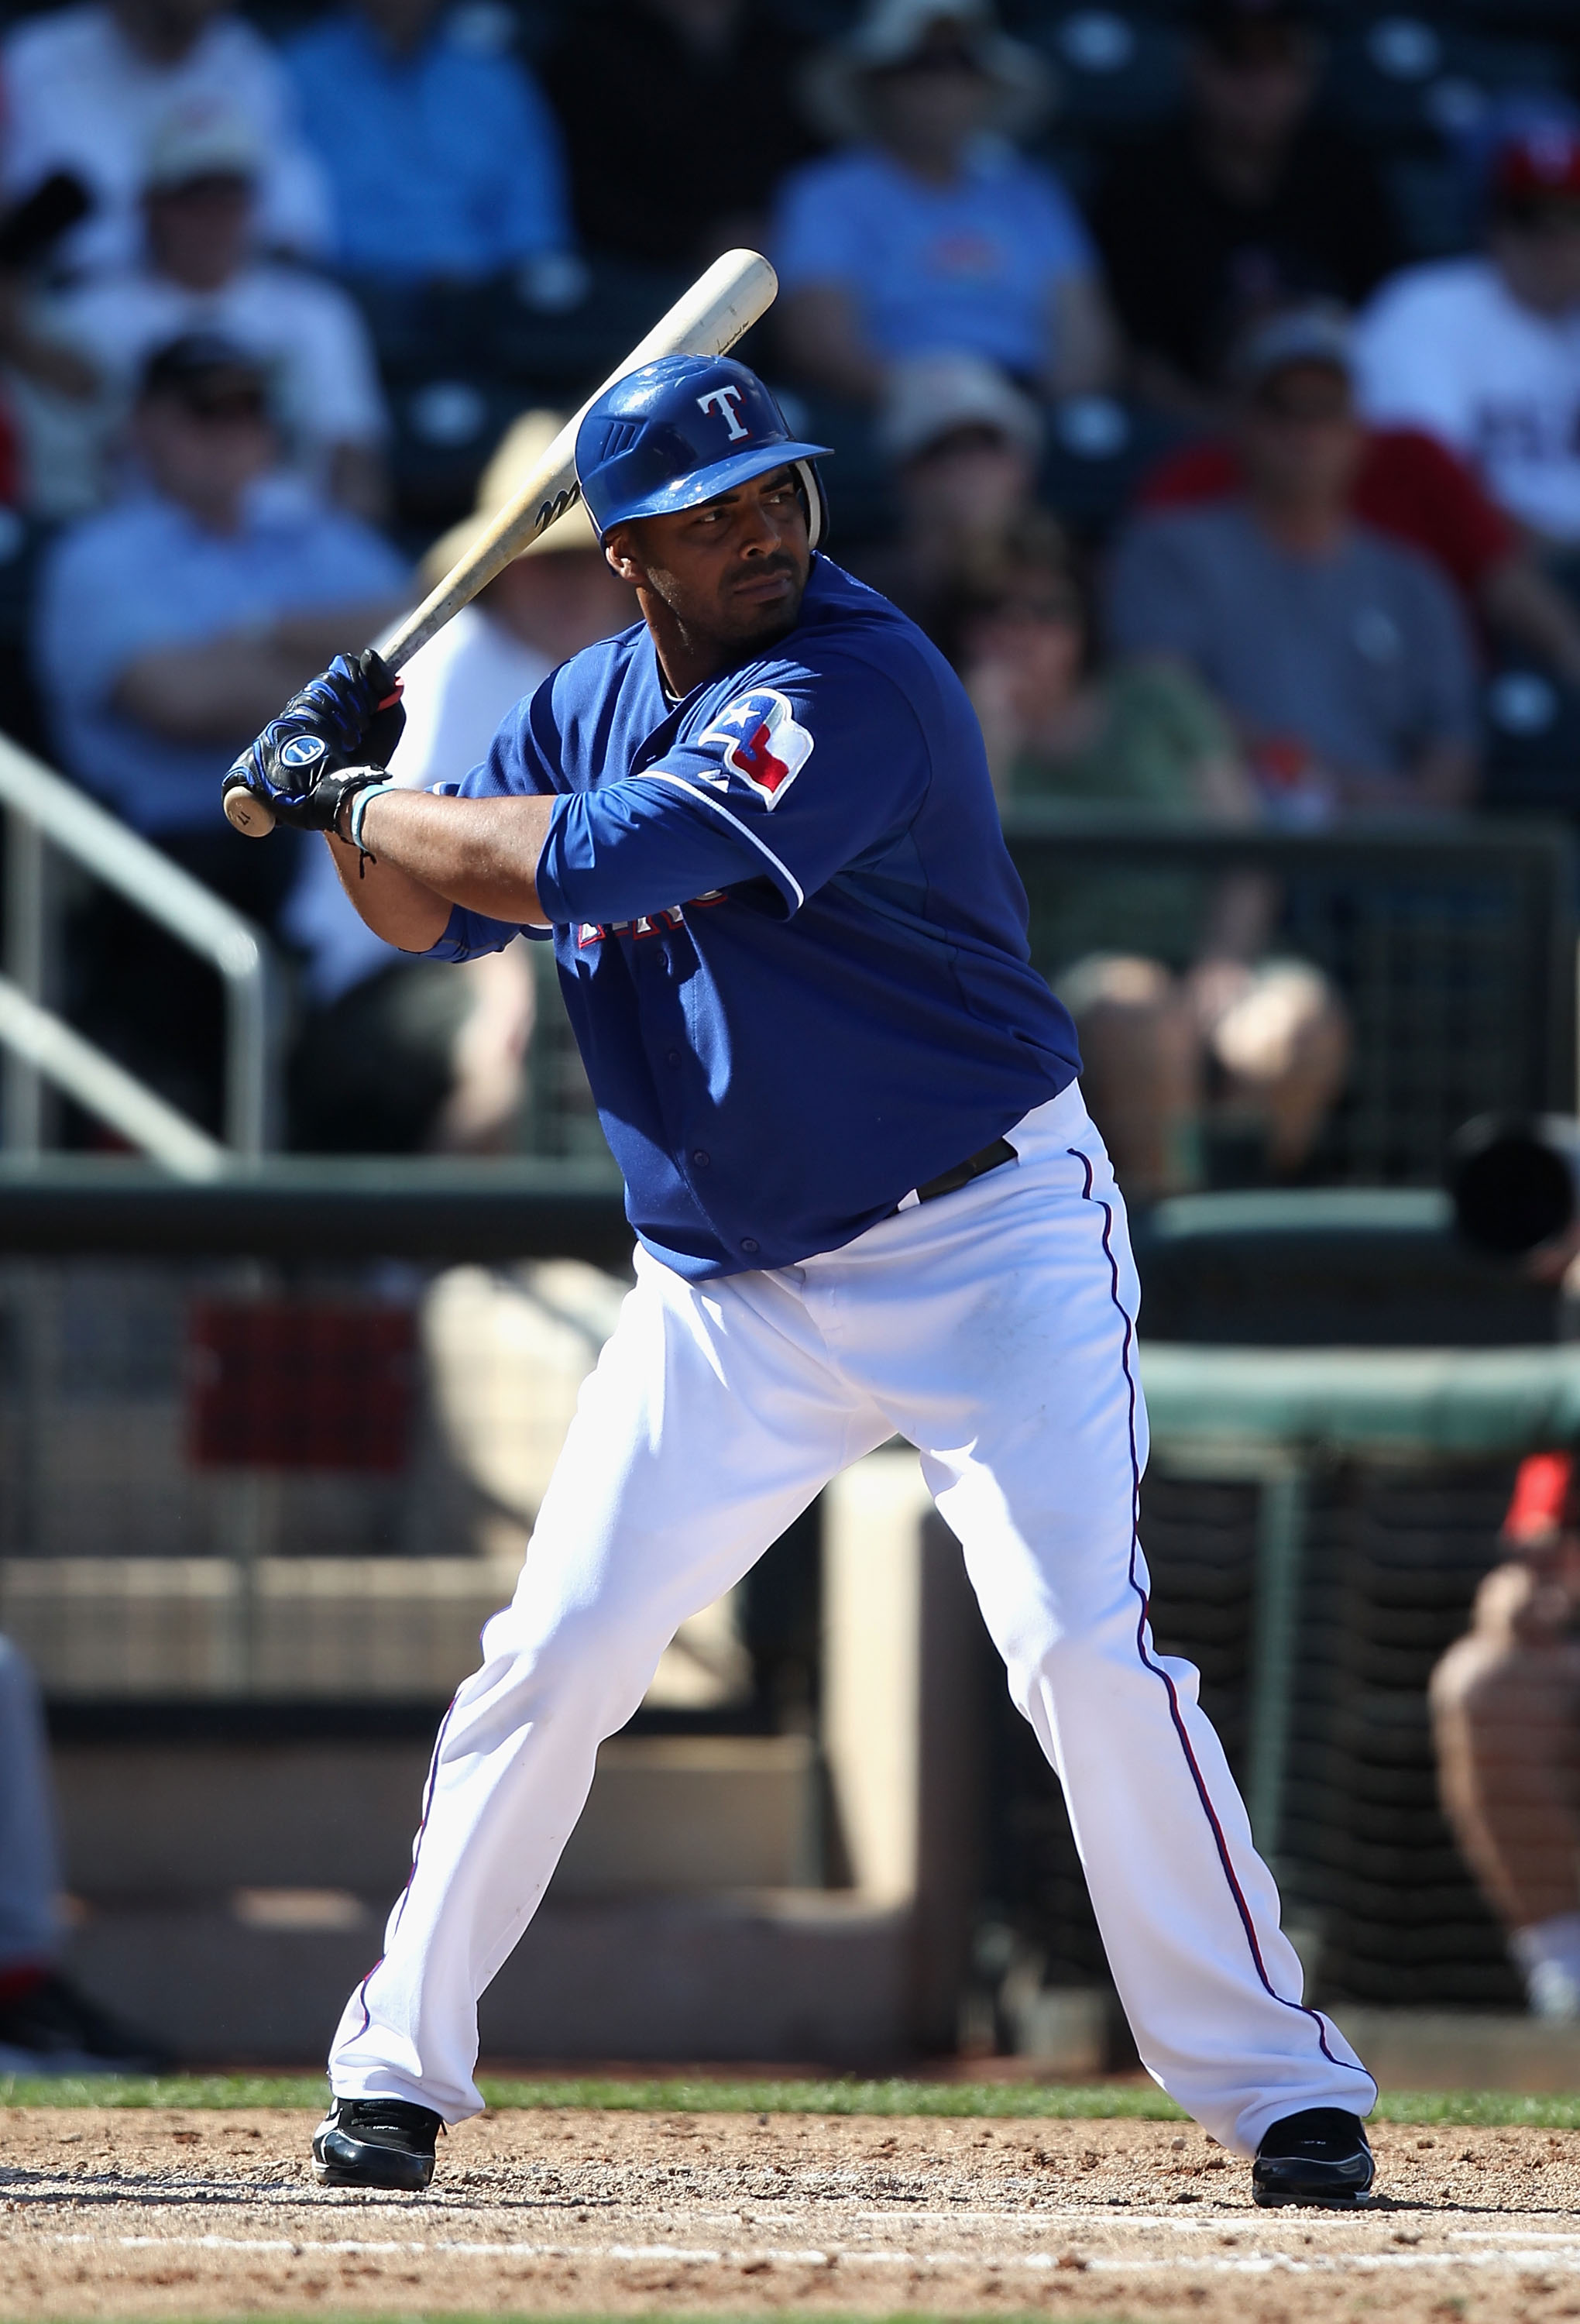 SURPRISE, AZ - MARCH 02:  Nelson Cruz #17 of the Texas Rangers bats against the Los Angeles Angels of Anaheim during the spring training game at Surprise Stadium on March 2, 2011 in Surprise, Arizona.  (Photo by Christian Petersen/Getty Images)